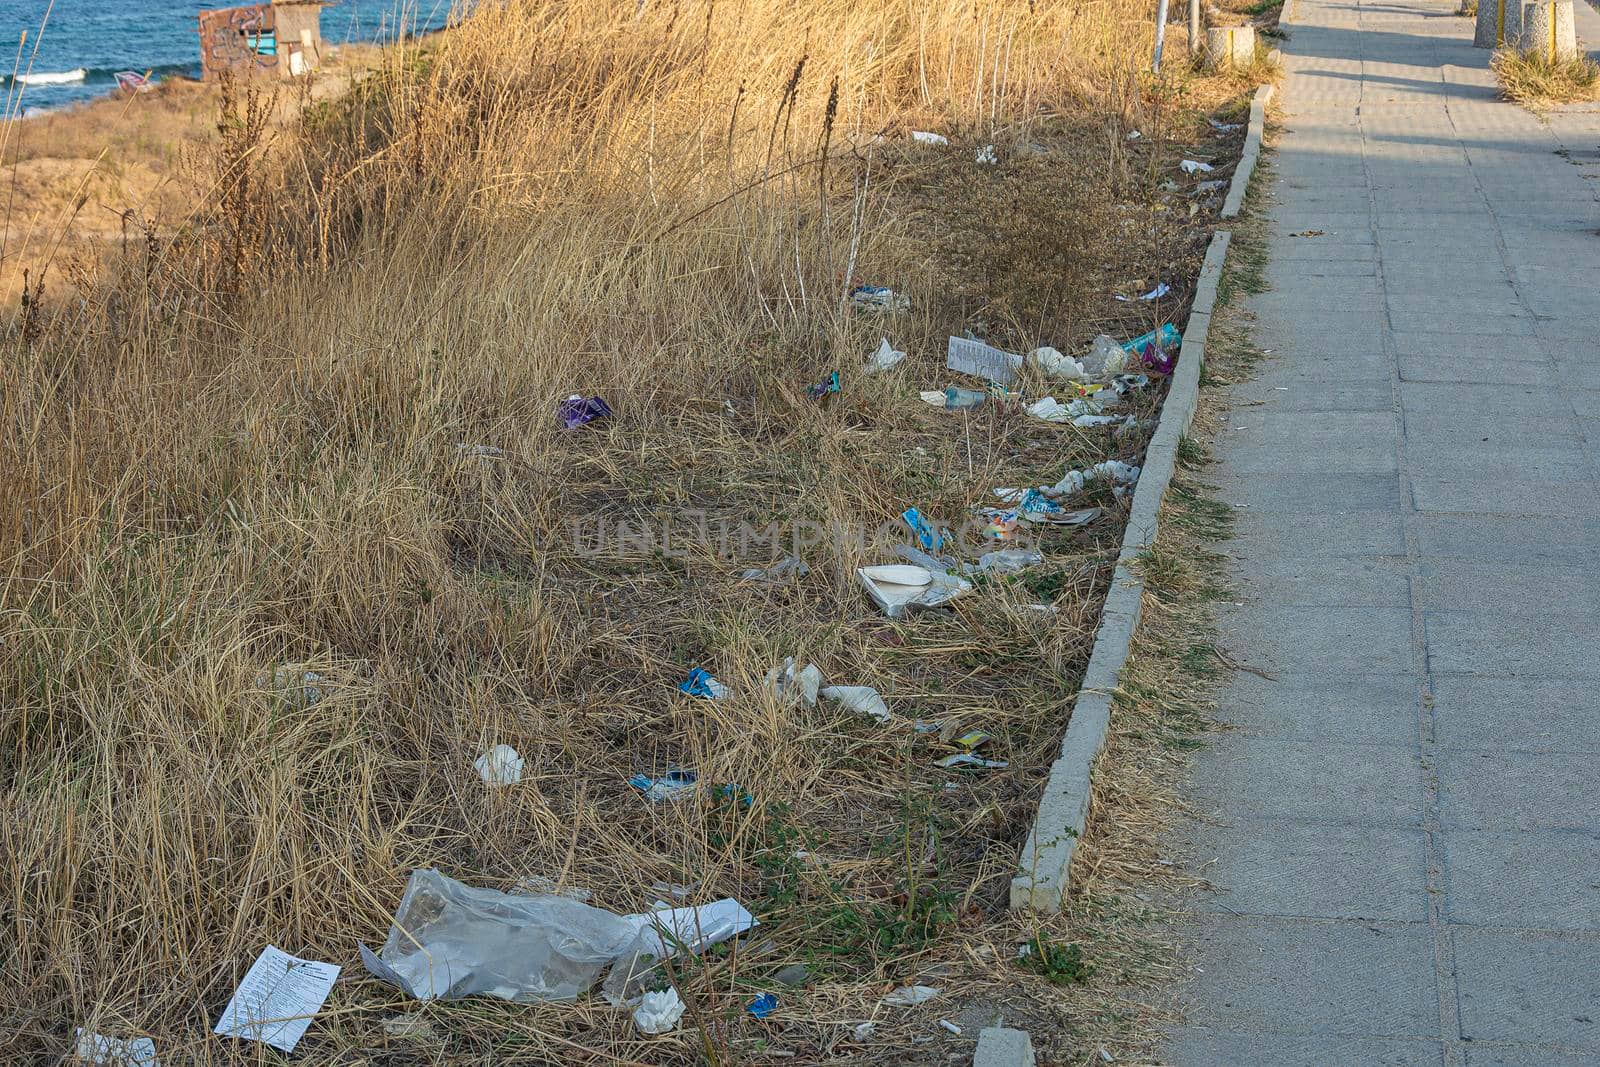 Garbage on the grass along the pedestrian sidewalk. Stock photo.